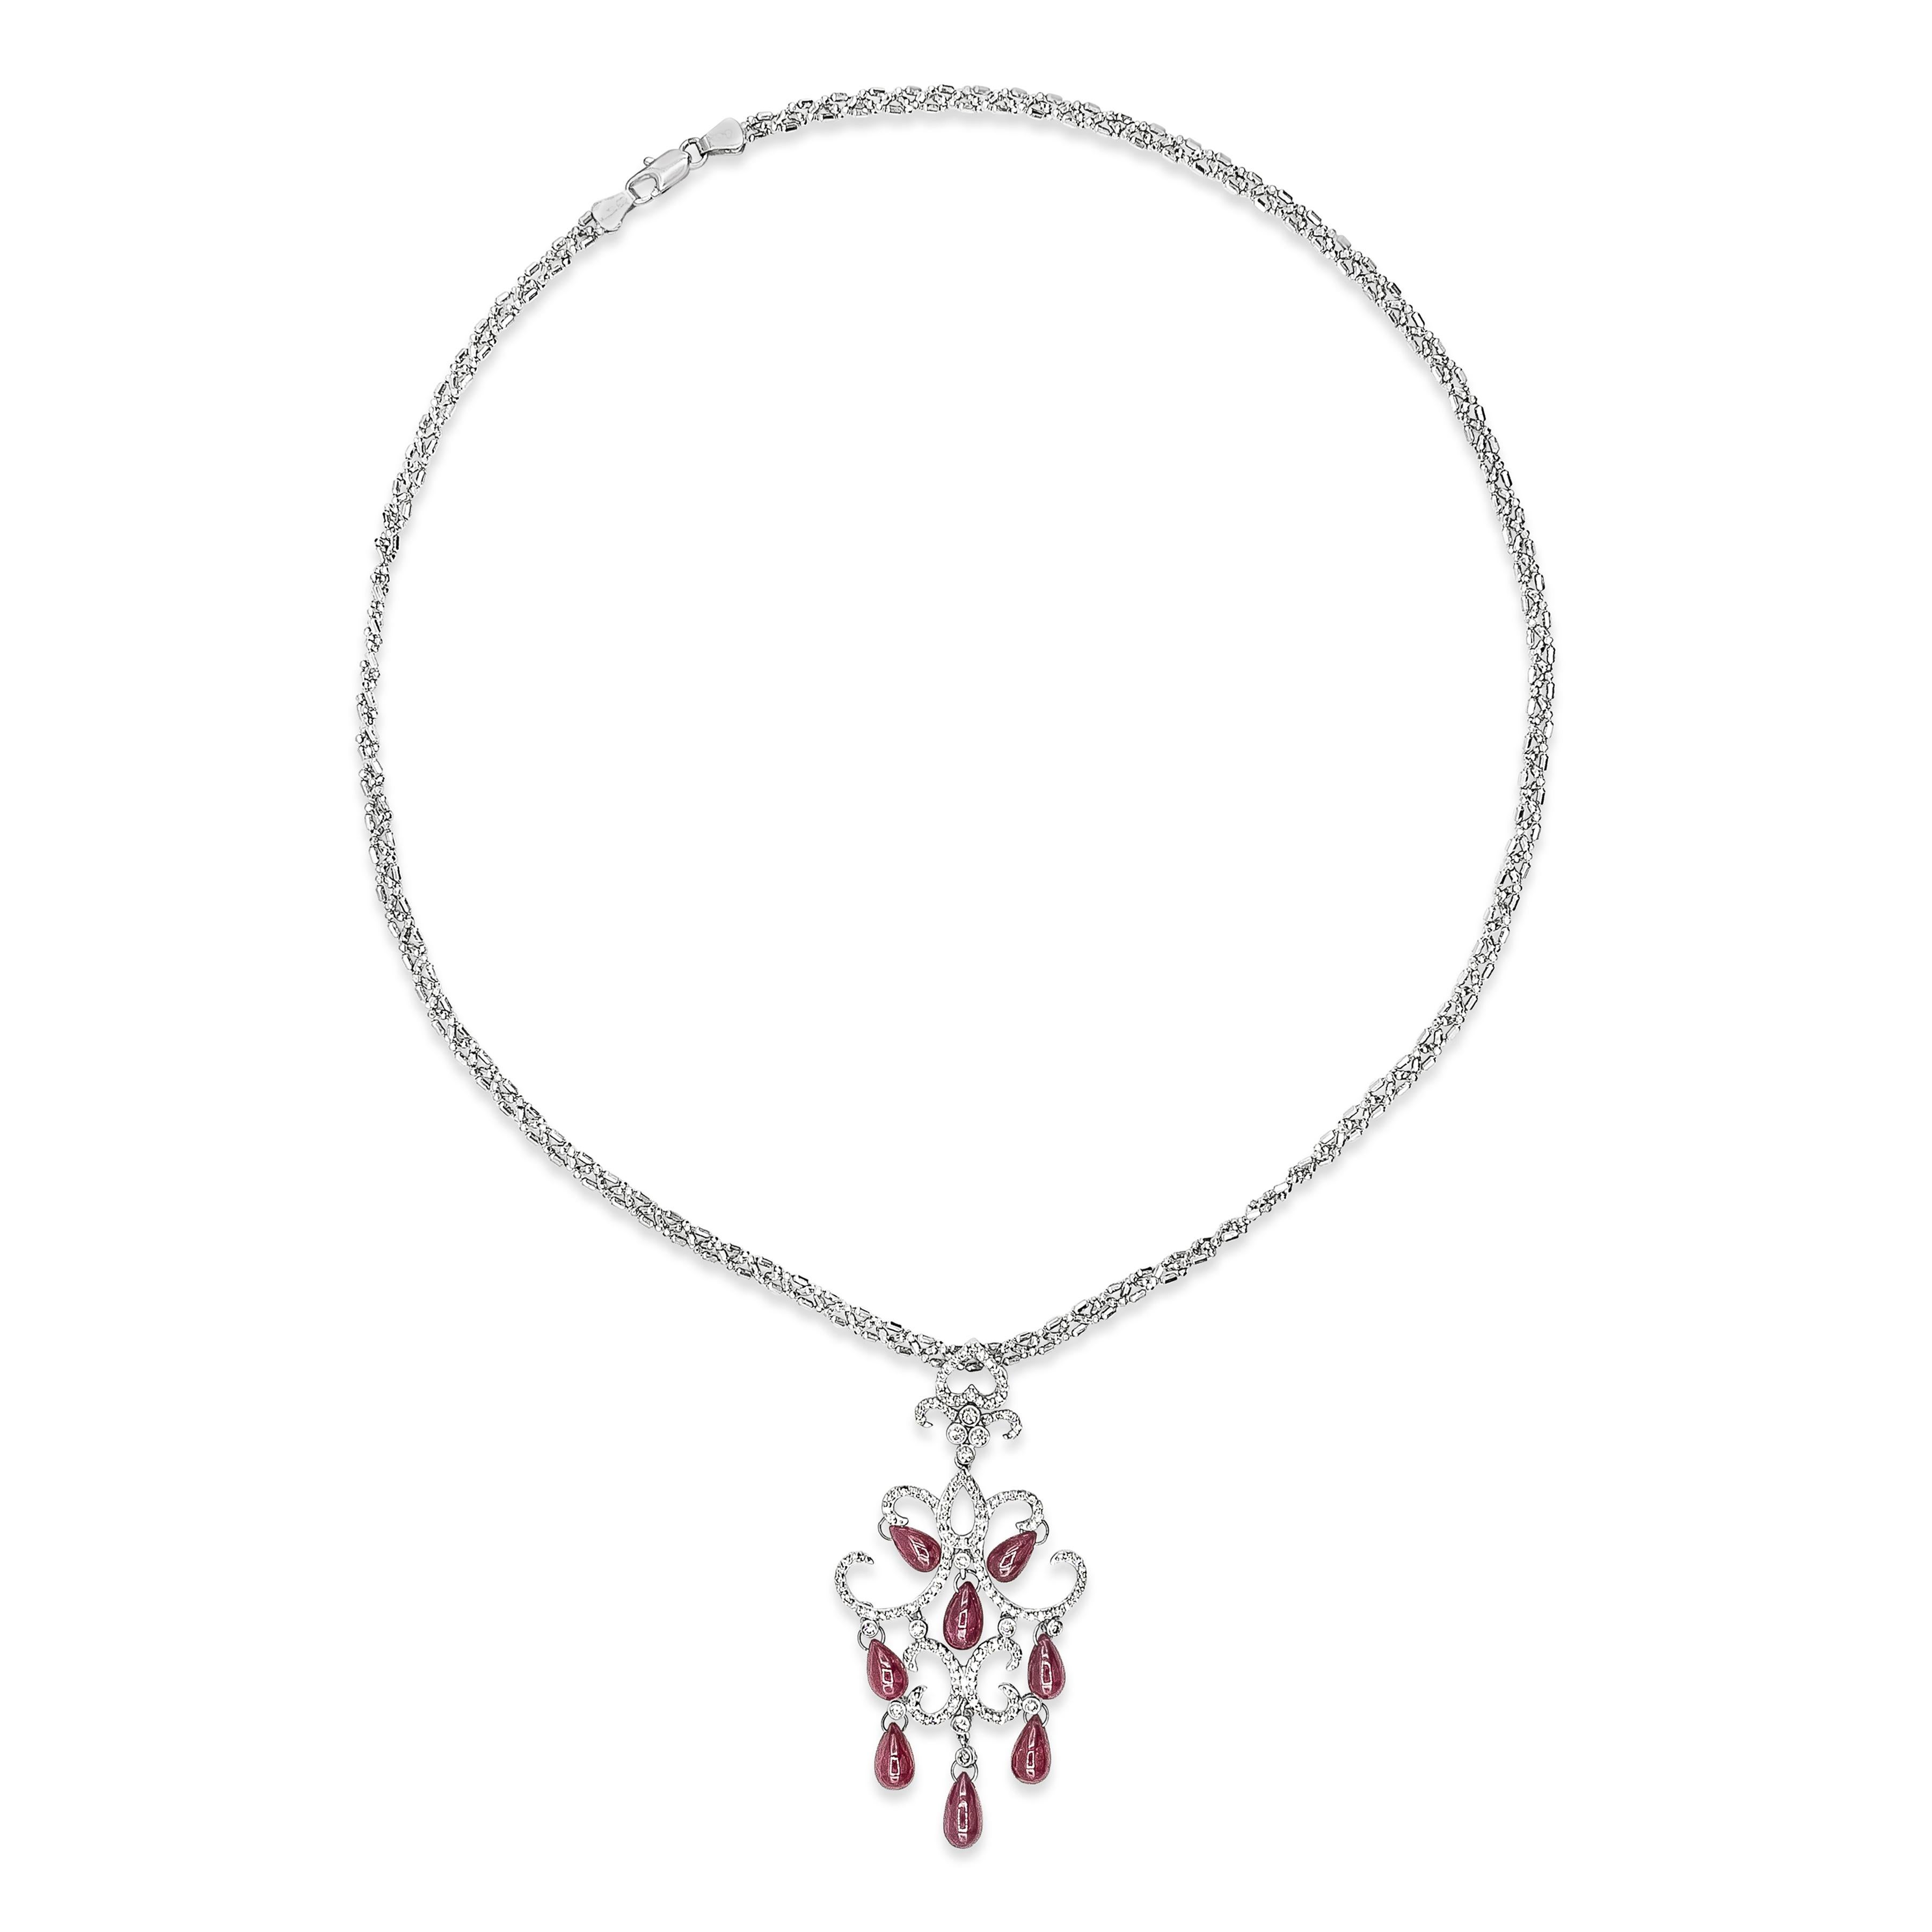 Contemporary 16.25 Carats Briolette Rubies with Round Cut Diamonds Chandelier Necklace For Sale